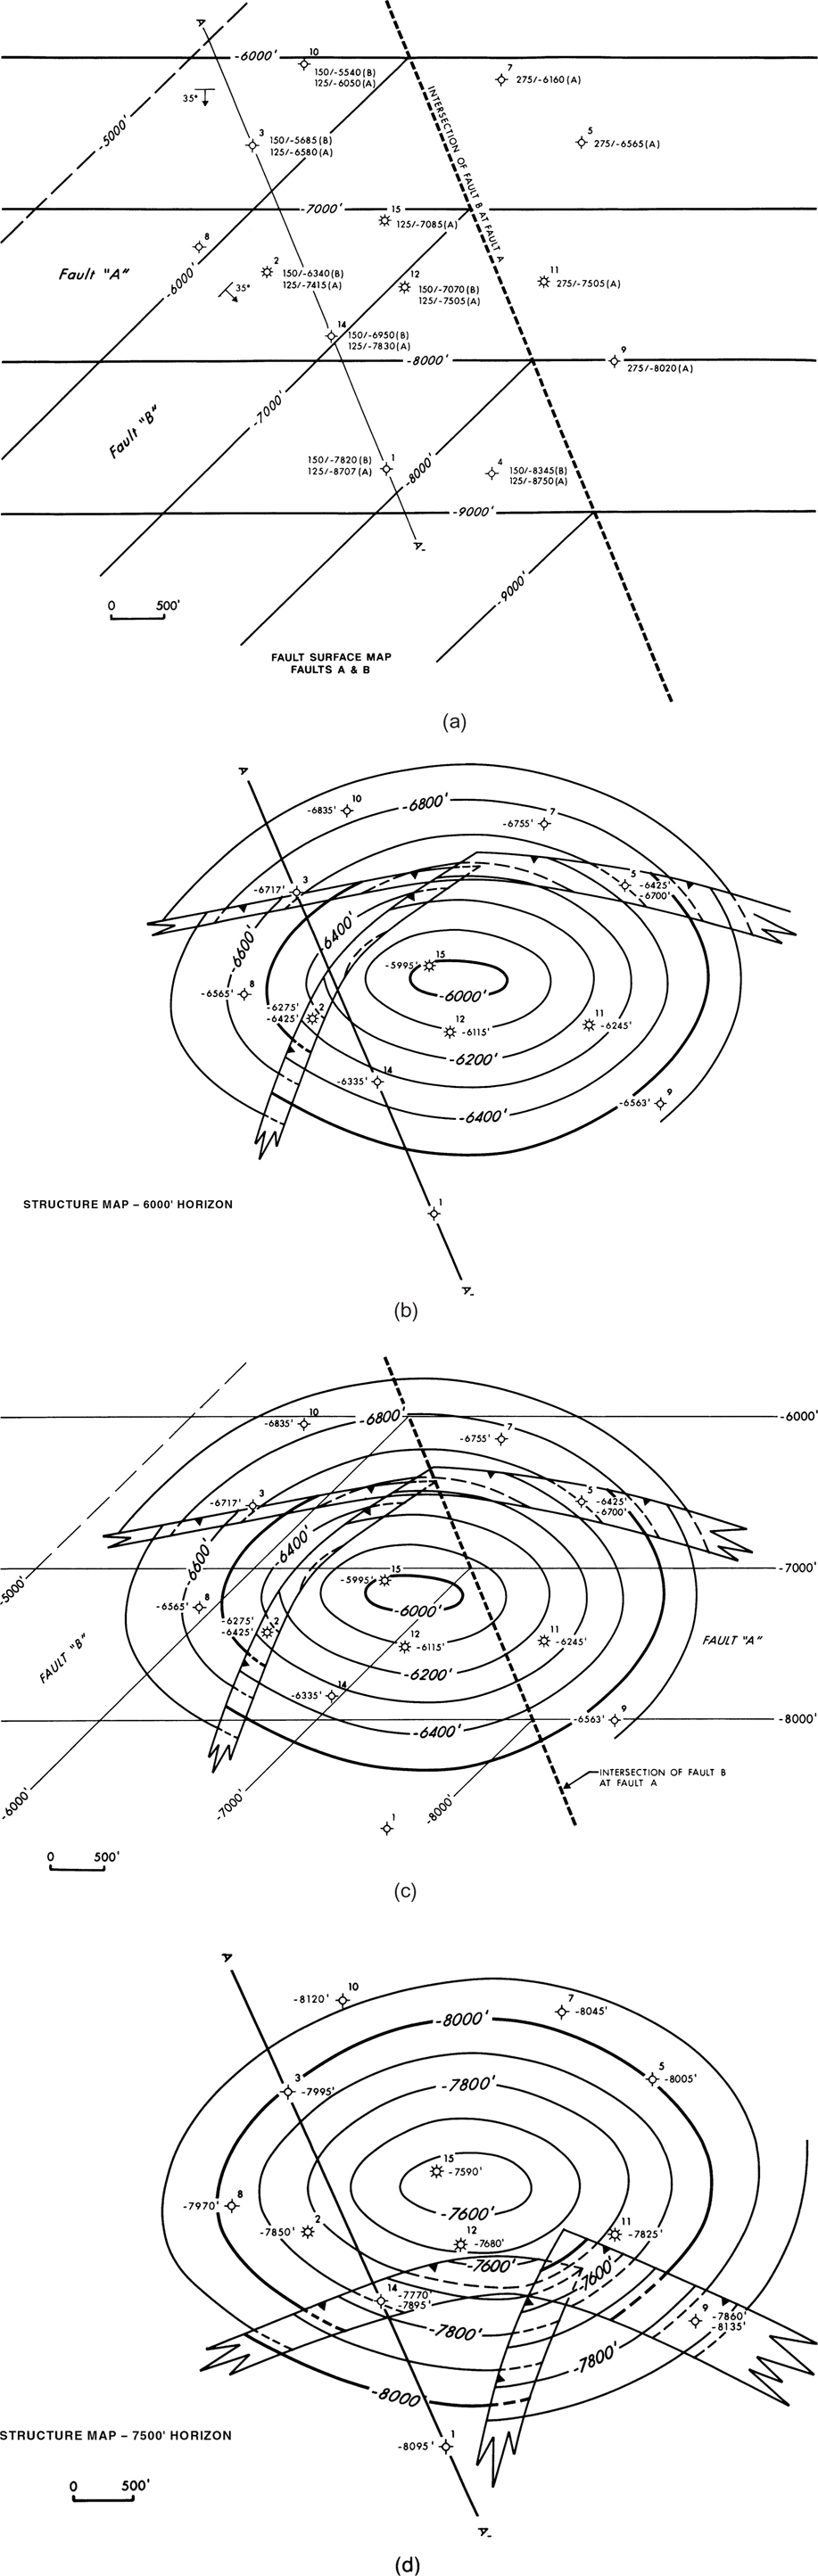 A figure shows the completed structure map for the 7000 feet horizon.